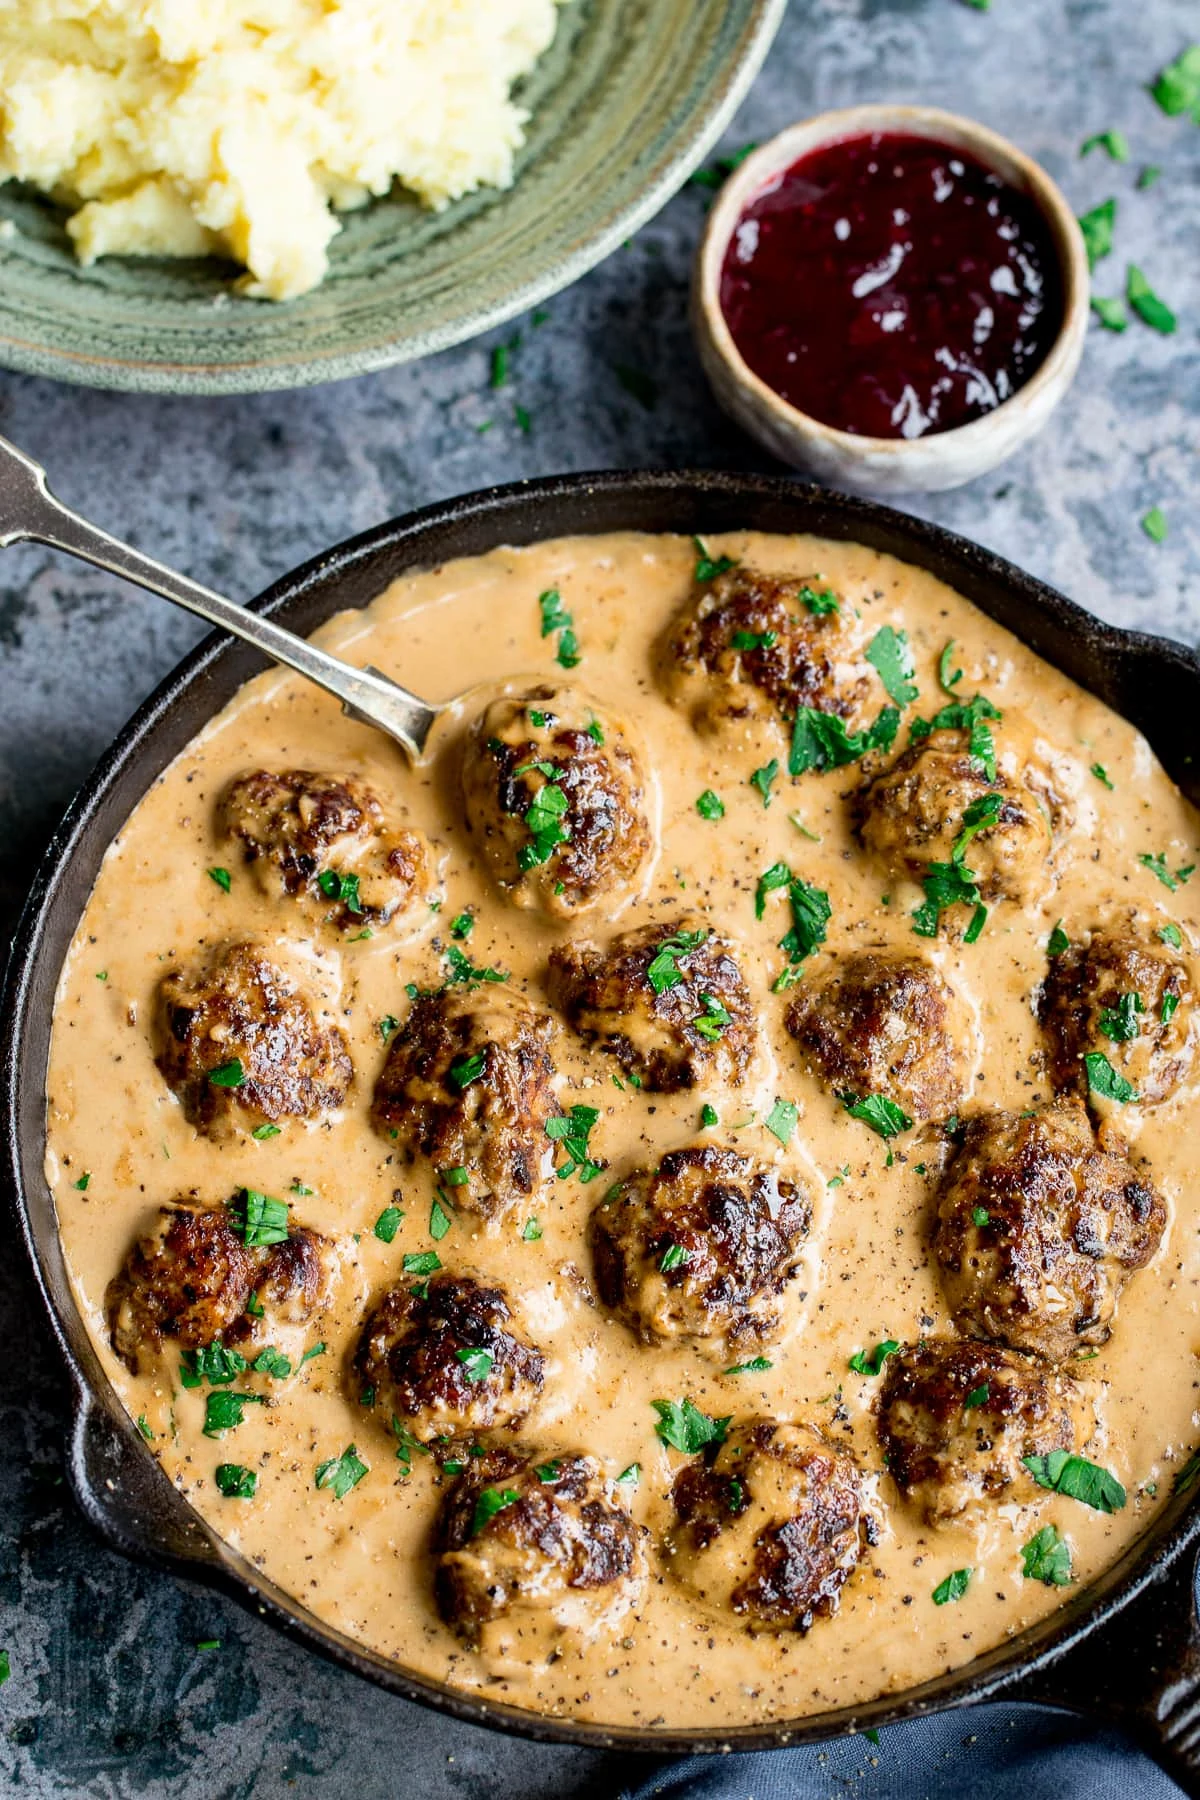 Swedish meatballs and gravy in a pan next to a pot of lingonberry jelly and mashed potatoes